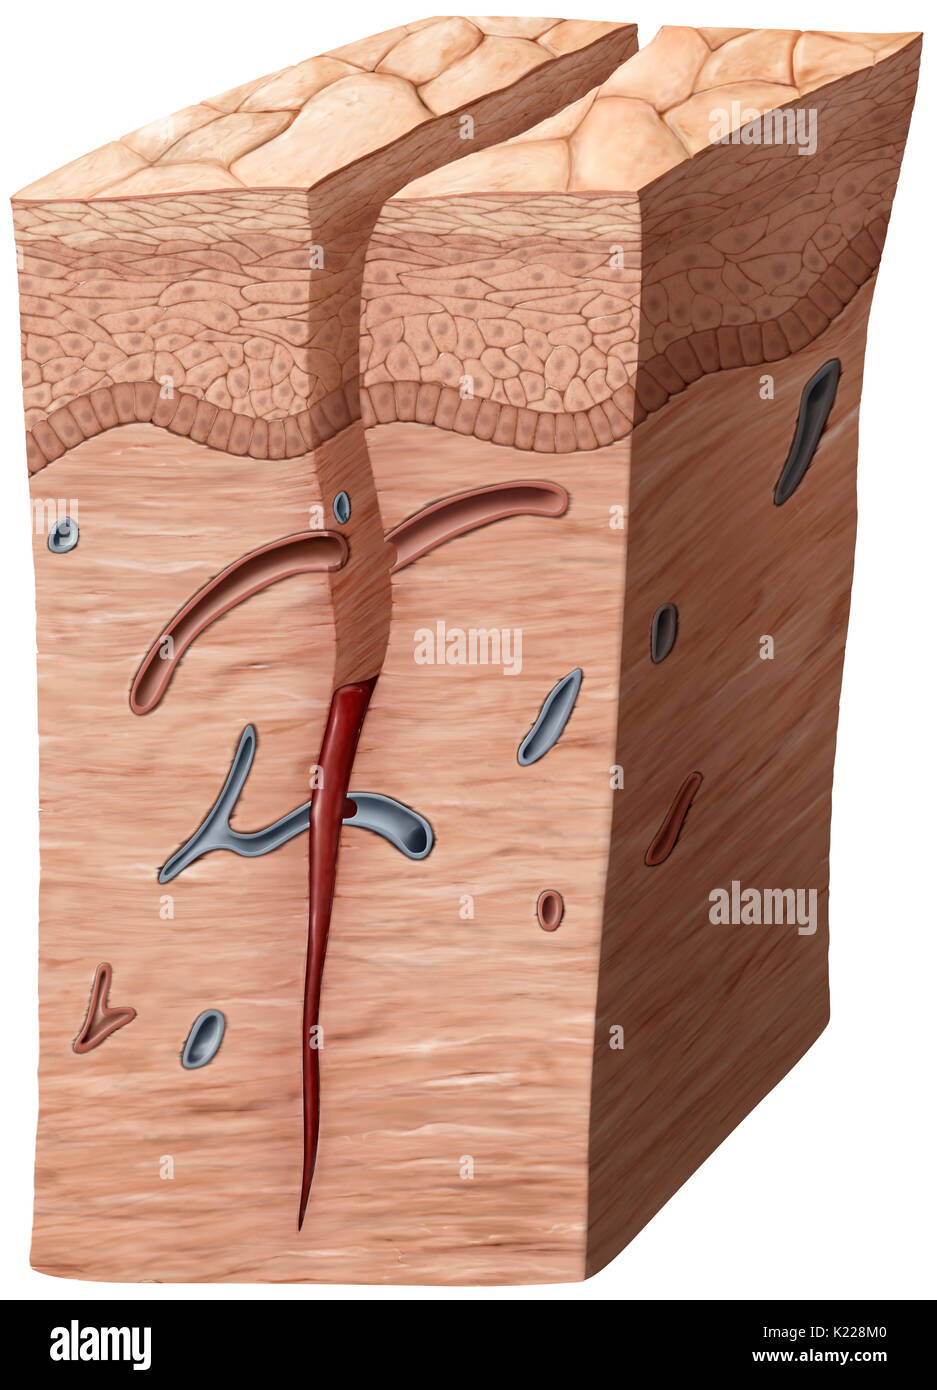 When an injury reaches down to the dermis, the capillaries within it burst, causing hemorrhaging. A blood clot forms at the bottom of the wound. Stock Photo